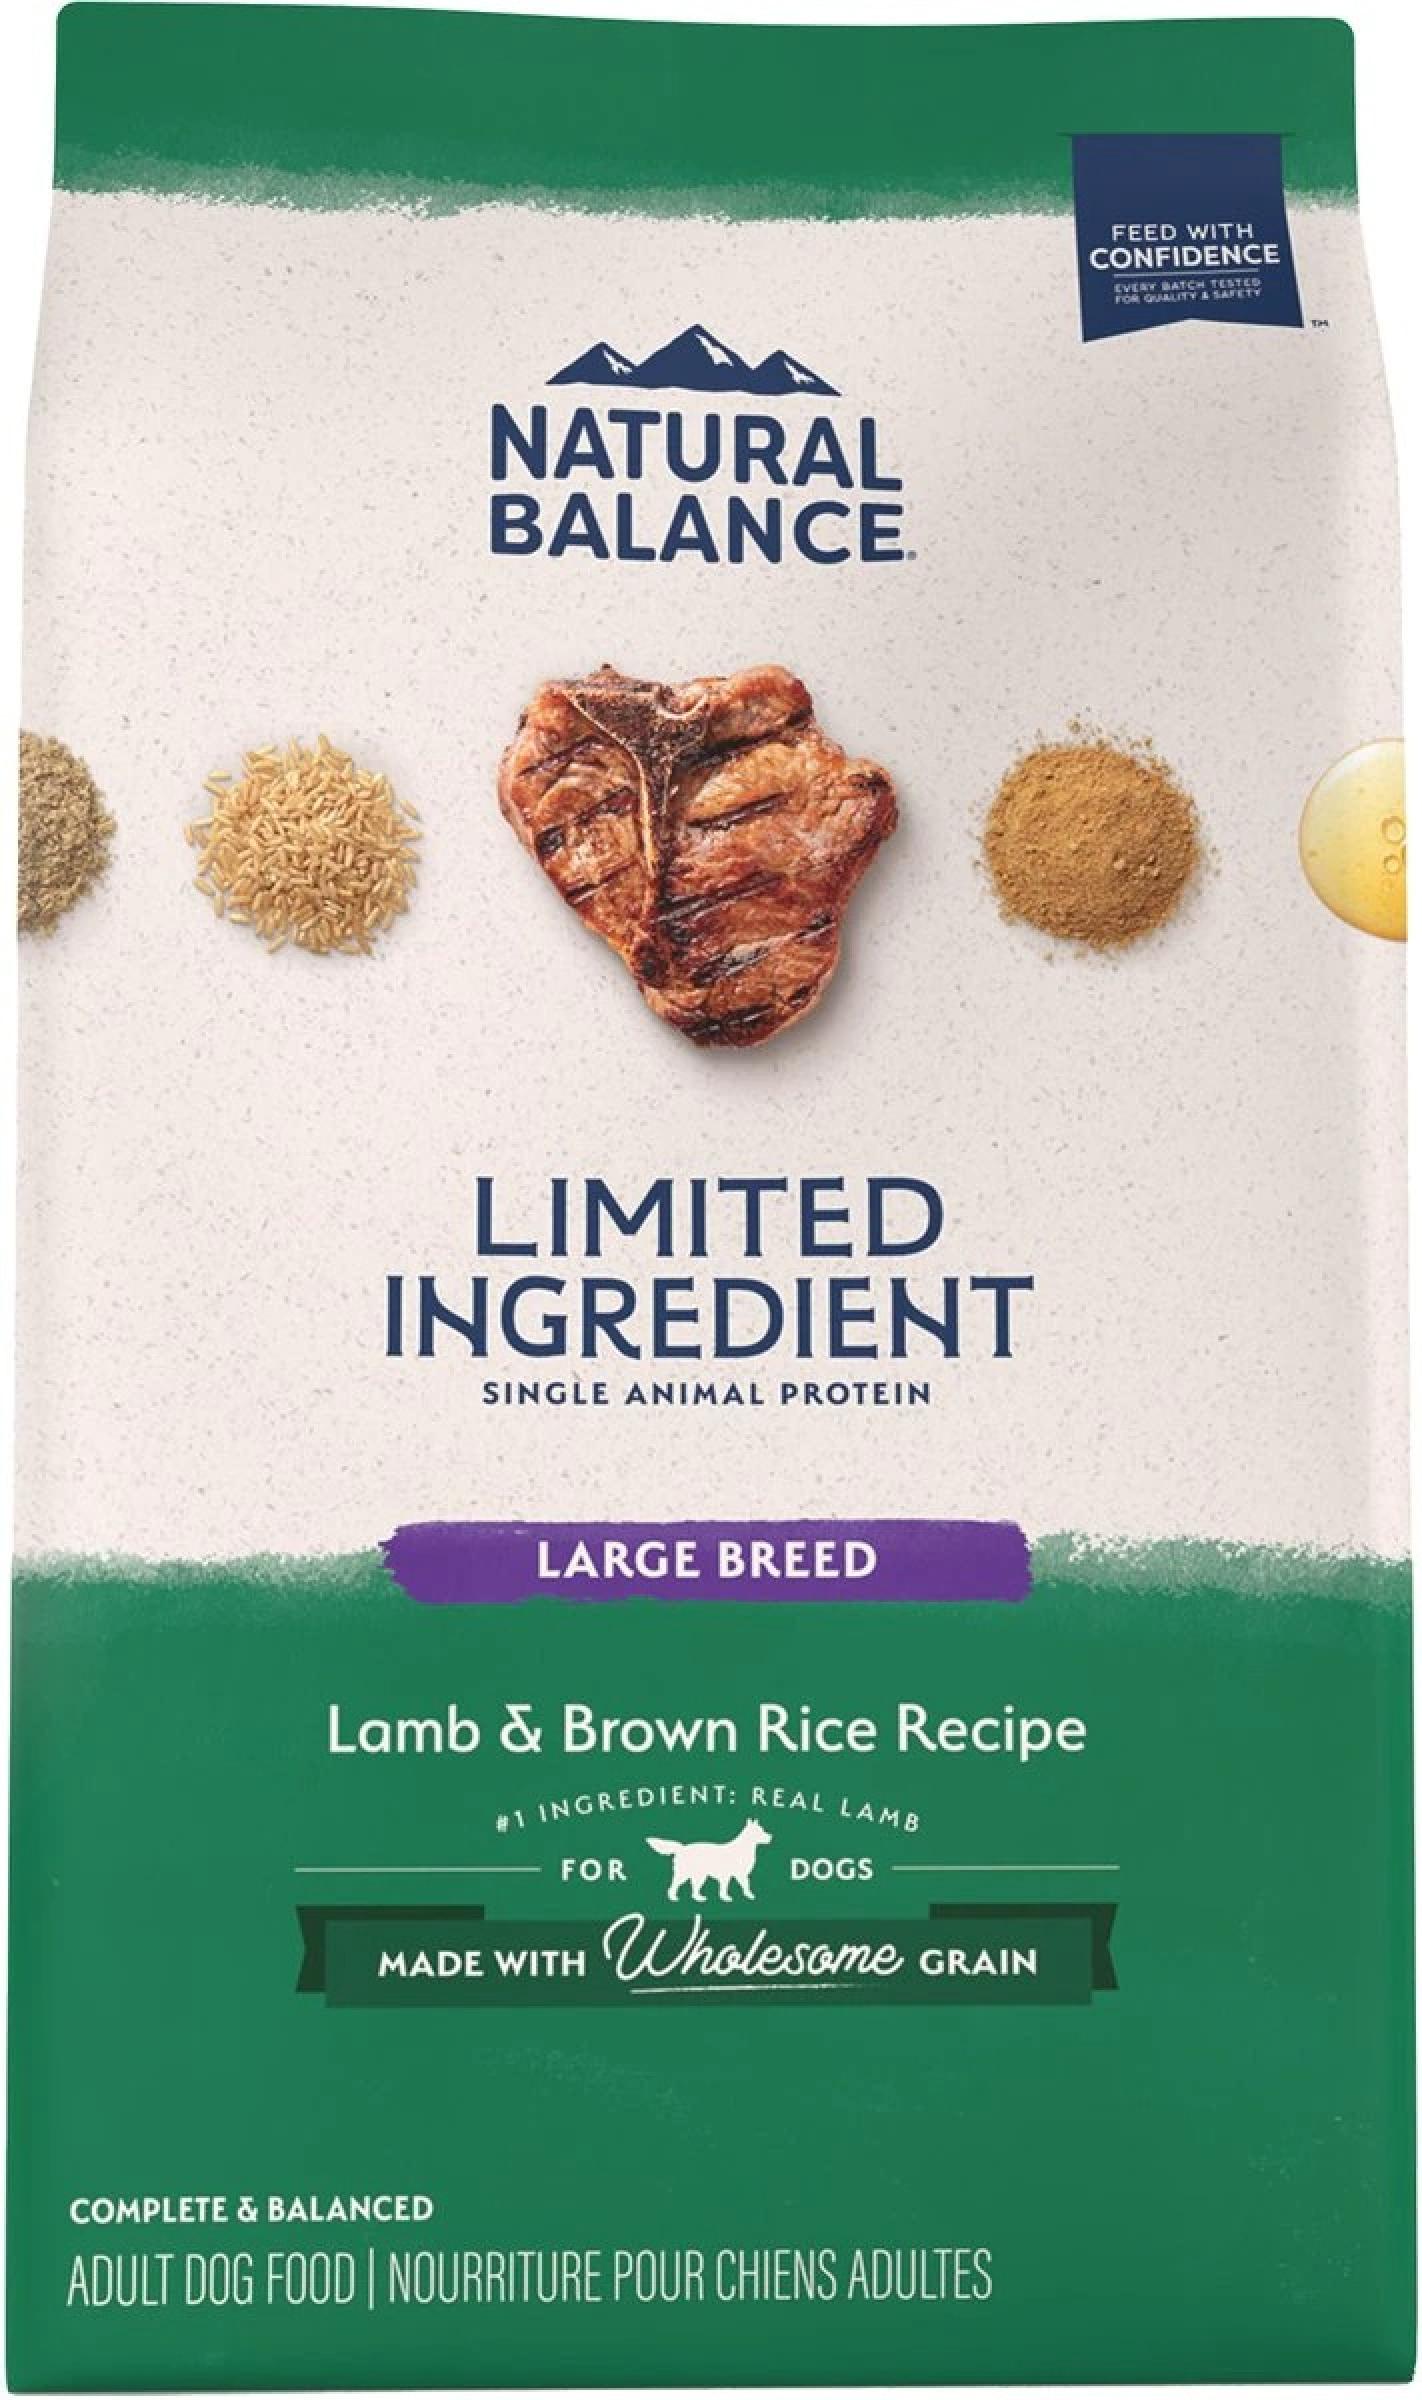 Natural Balance Limited Ingredient Lamb and Brown Rice Large Breed Recipe